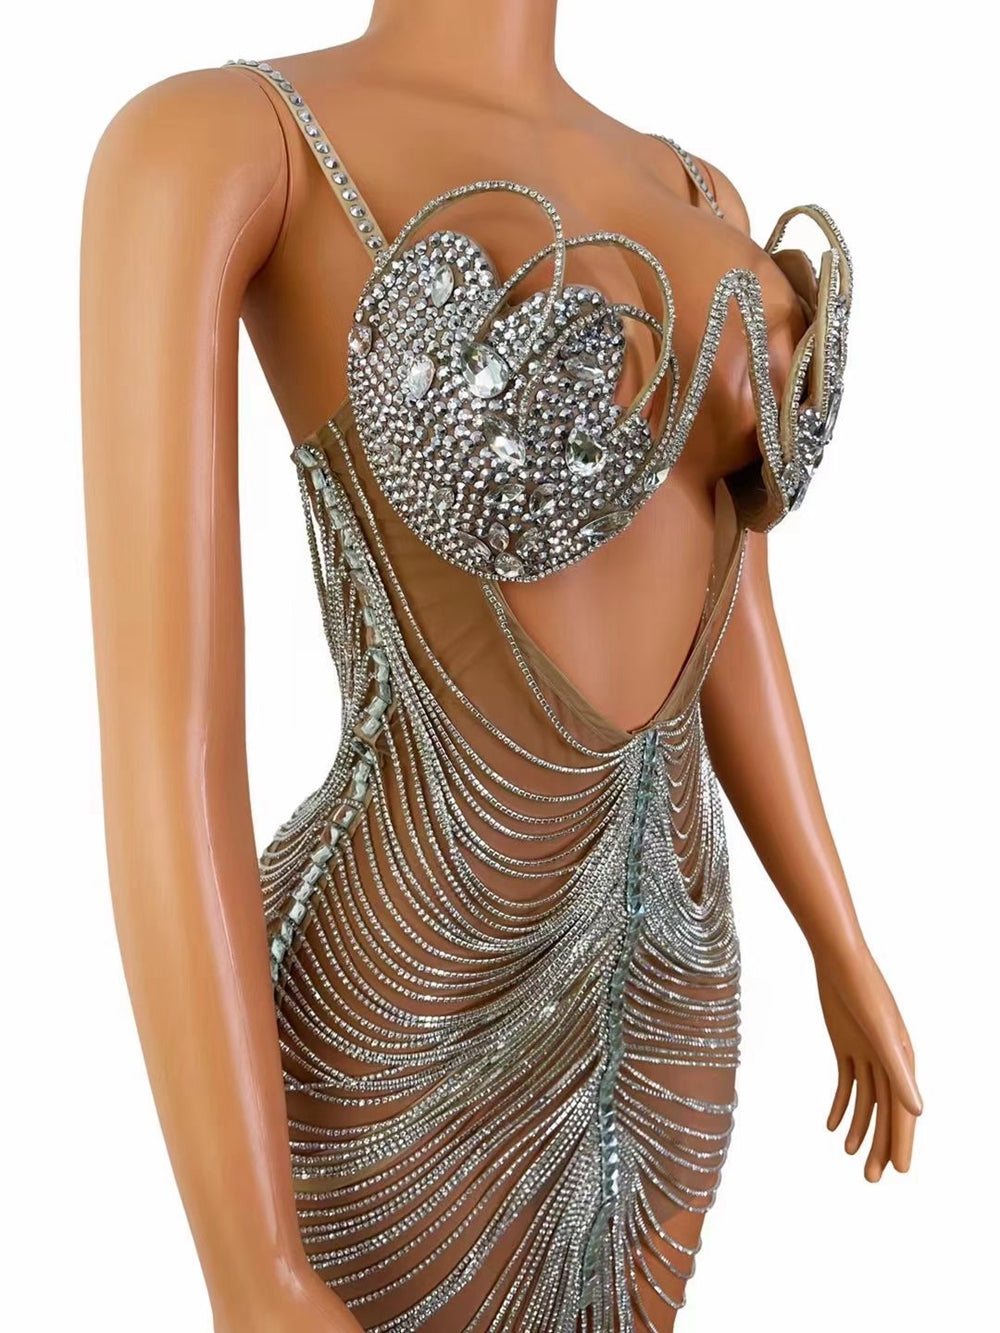 Luxurious Silver Crystals Chains Crystal Dress Birthday Celebrate Evening Prom Party Dress Sexy Performance Costume Stage Wear